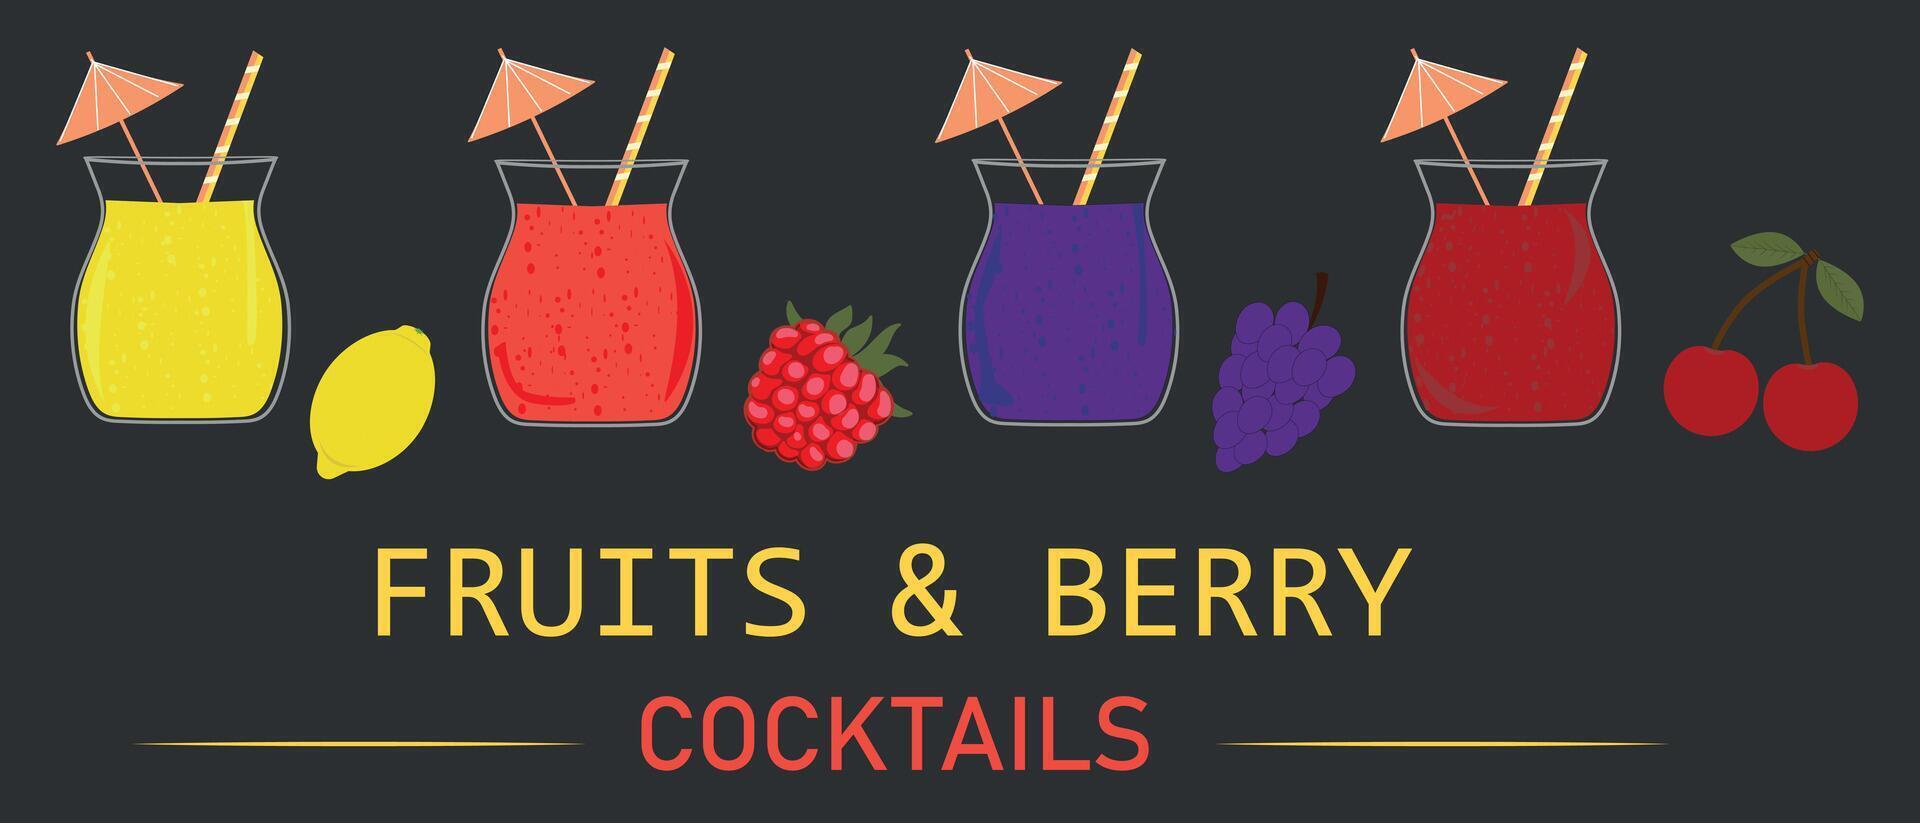 Set of vector illustrations of summer fruit and berry cocktails. Drawings with cocktails of various fruit and berry flavors, isolated on a black background. Drink, summer concept.